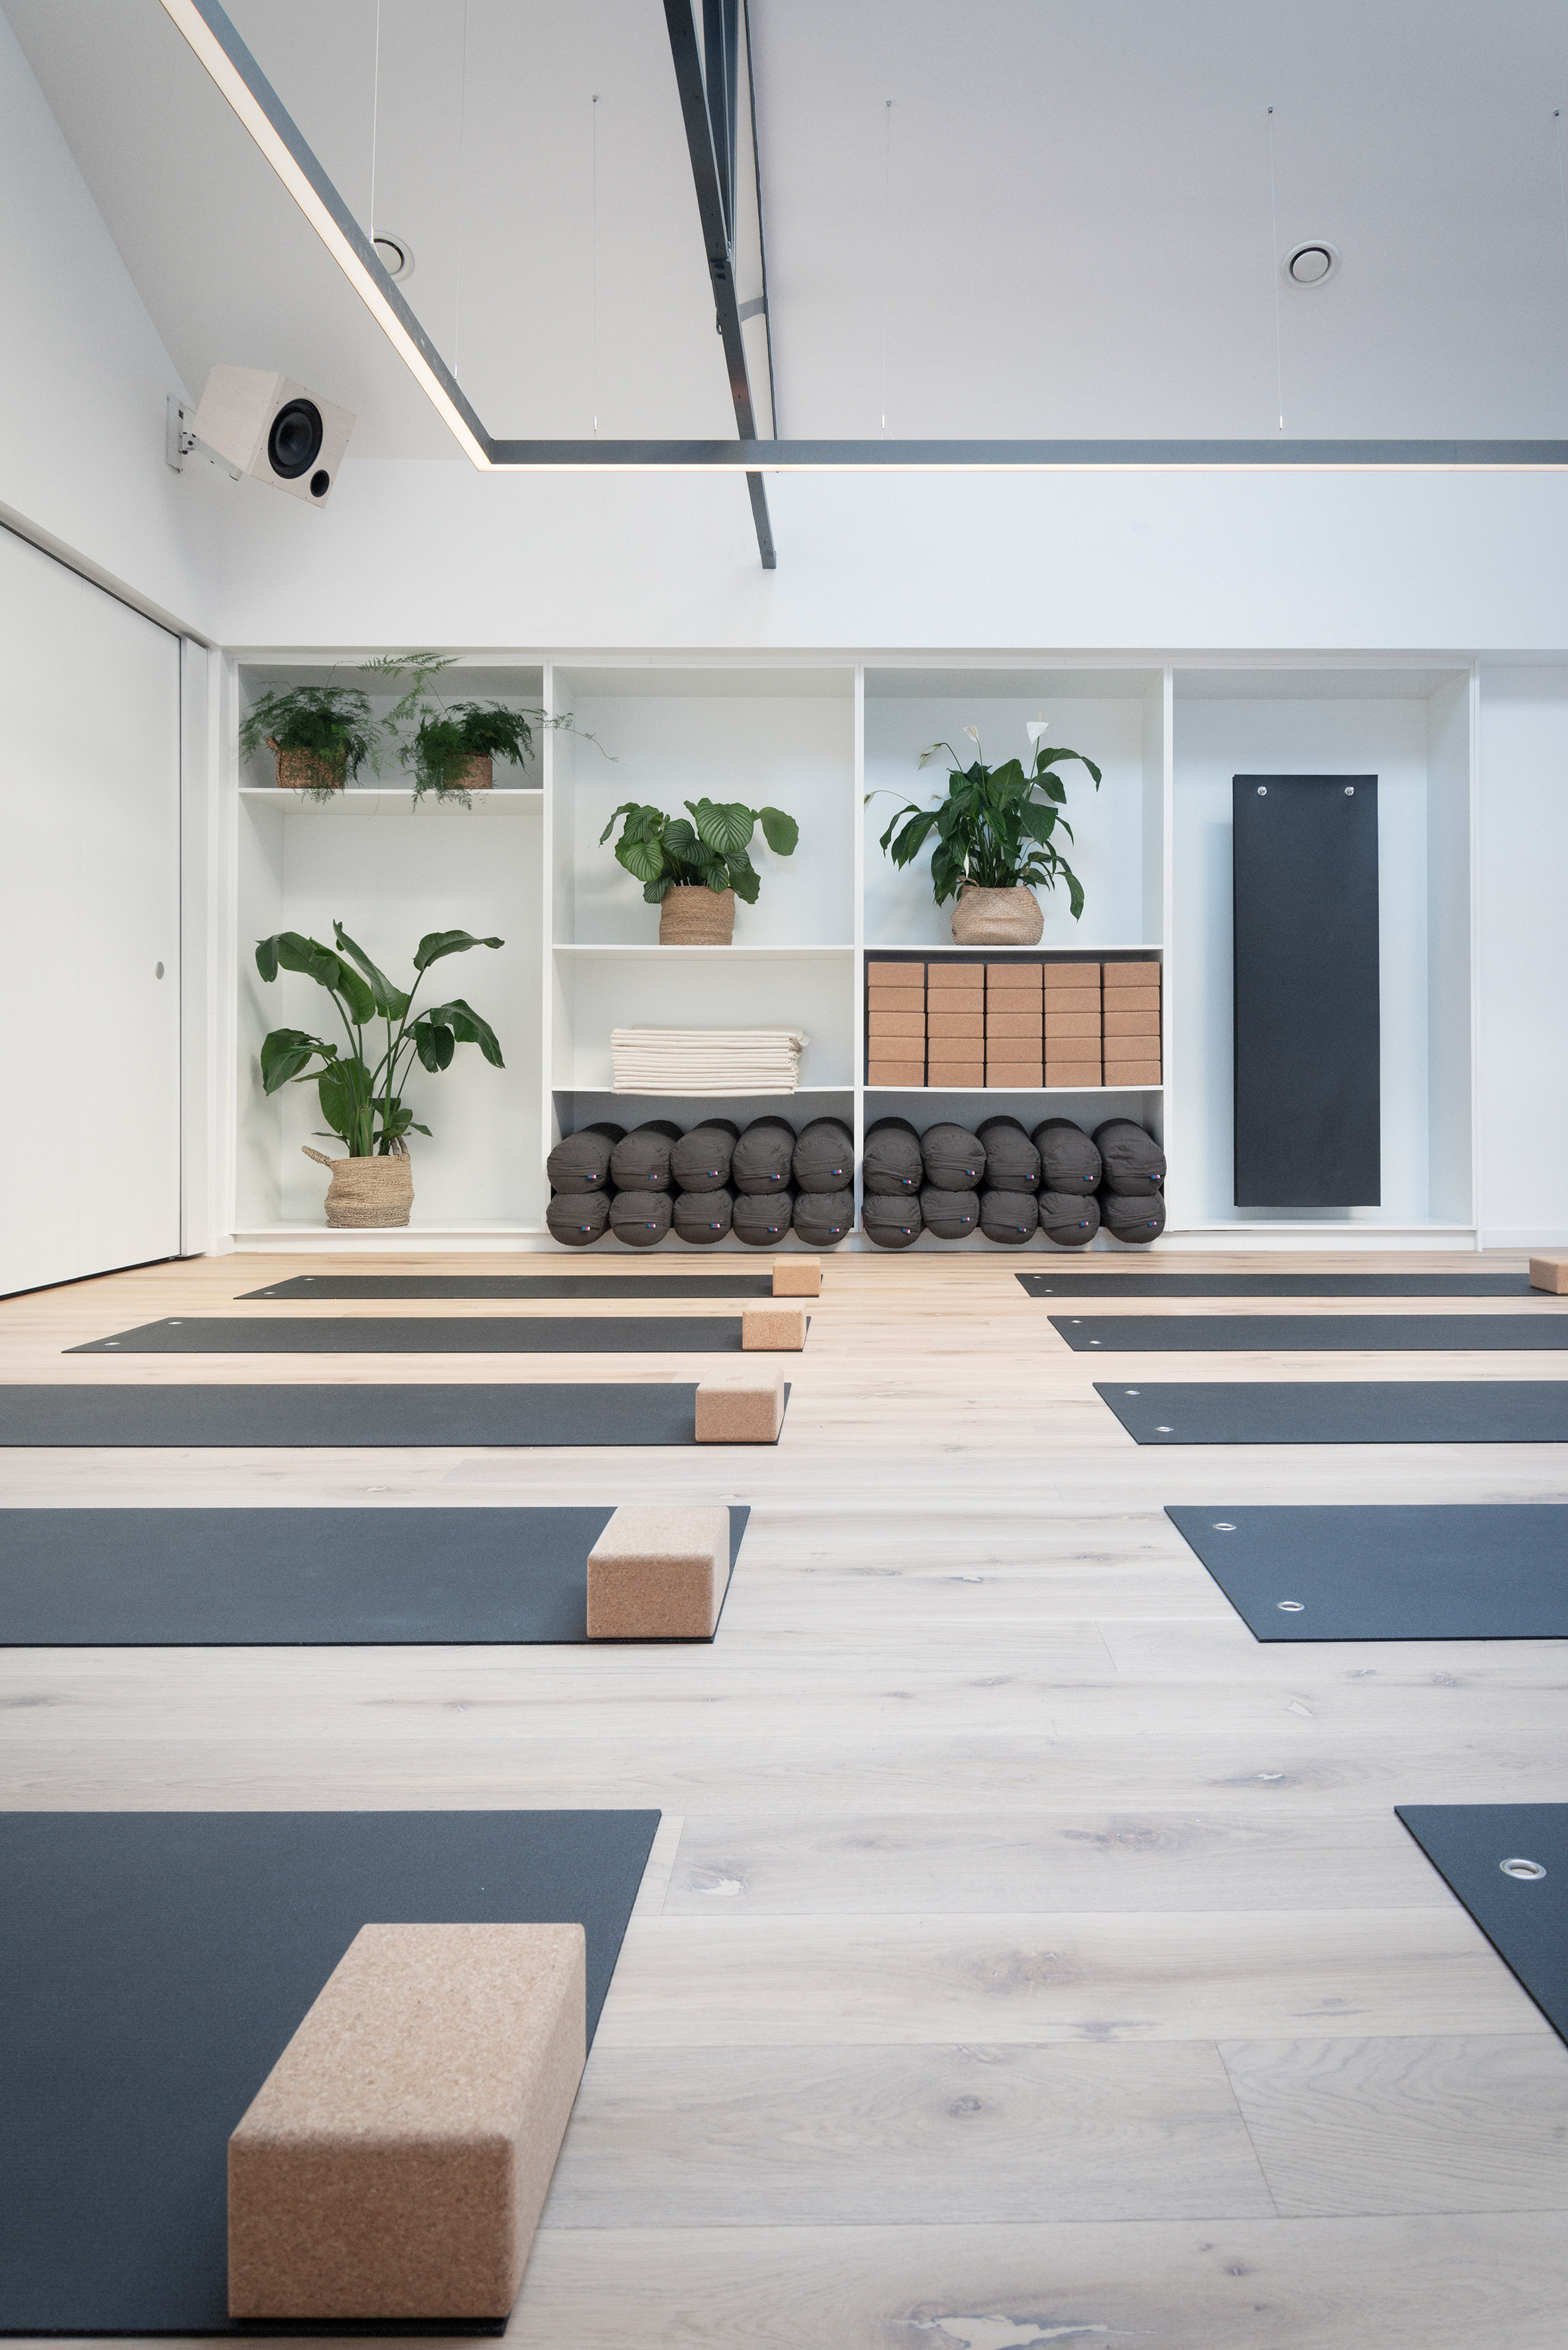 The Key Architectural Elements Required to Design Yoga and Meditation  Spaces